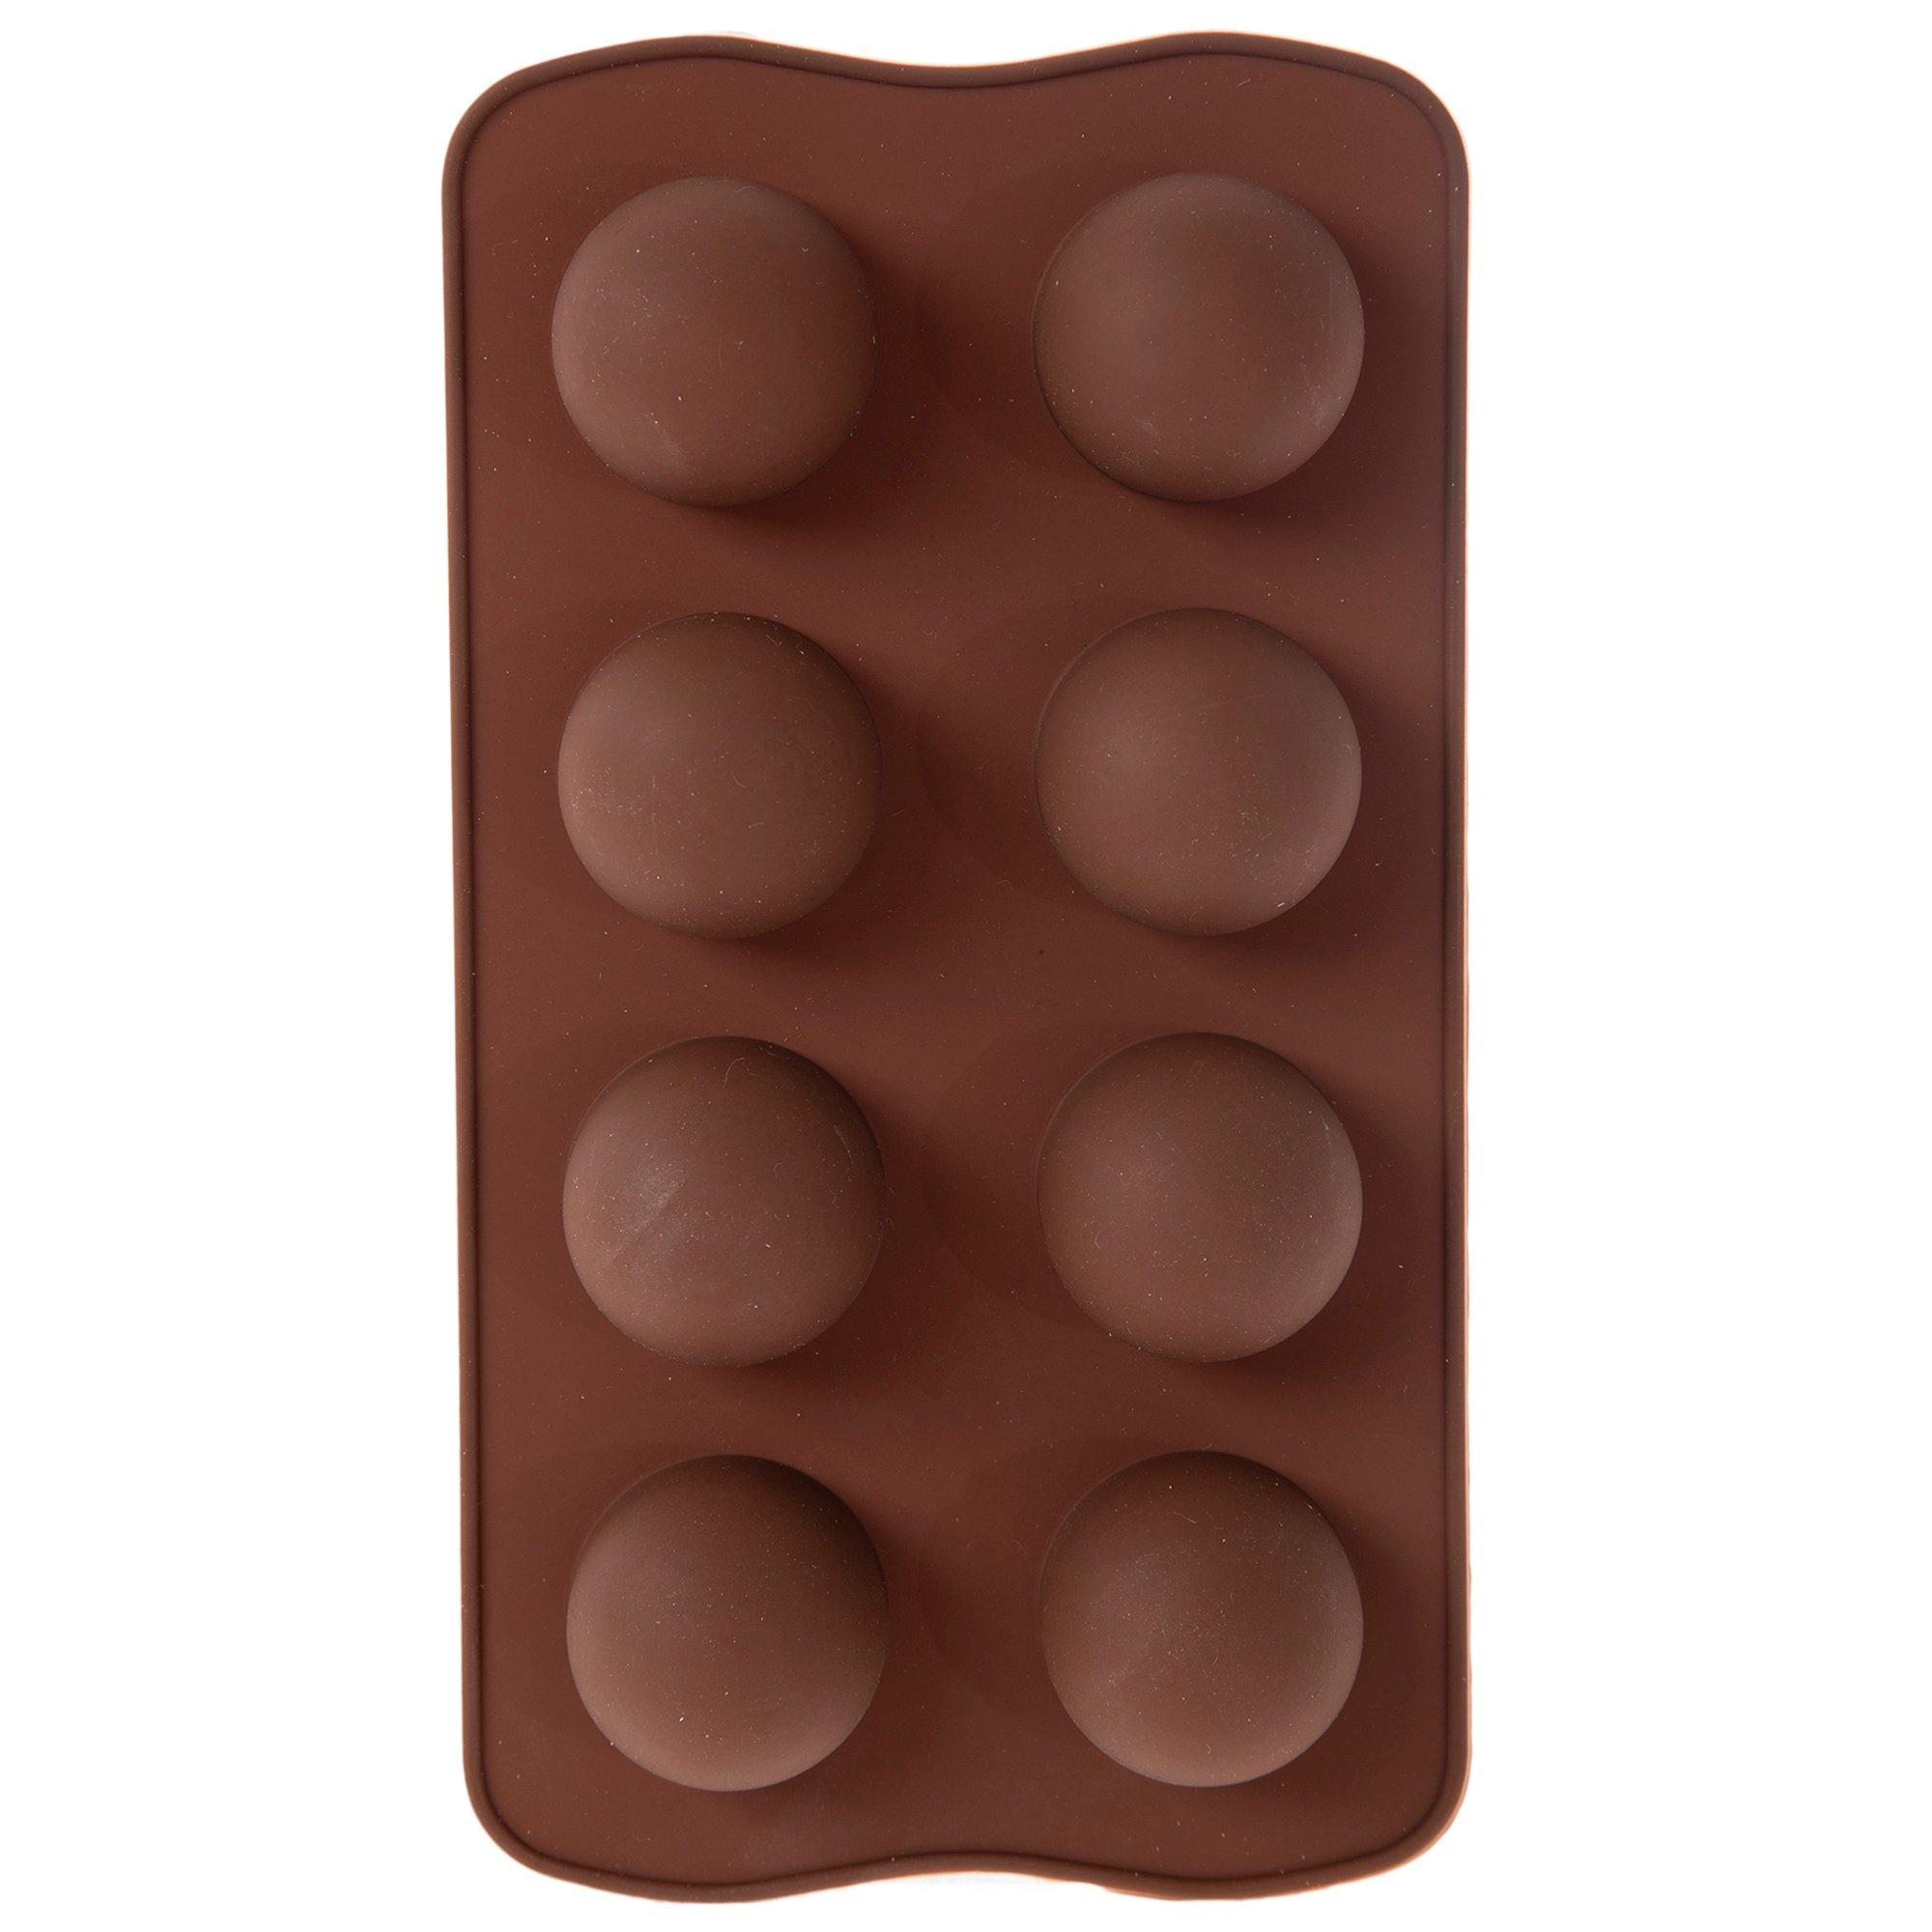 NIBESSER Updated Large 7 Holes Chocolate Silicone Molds